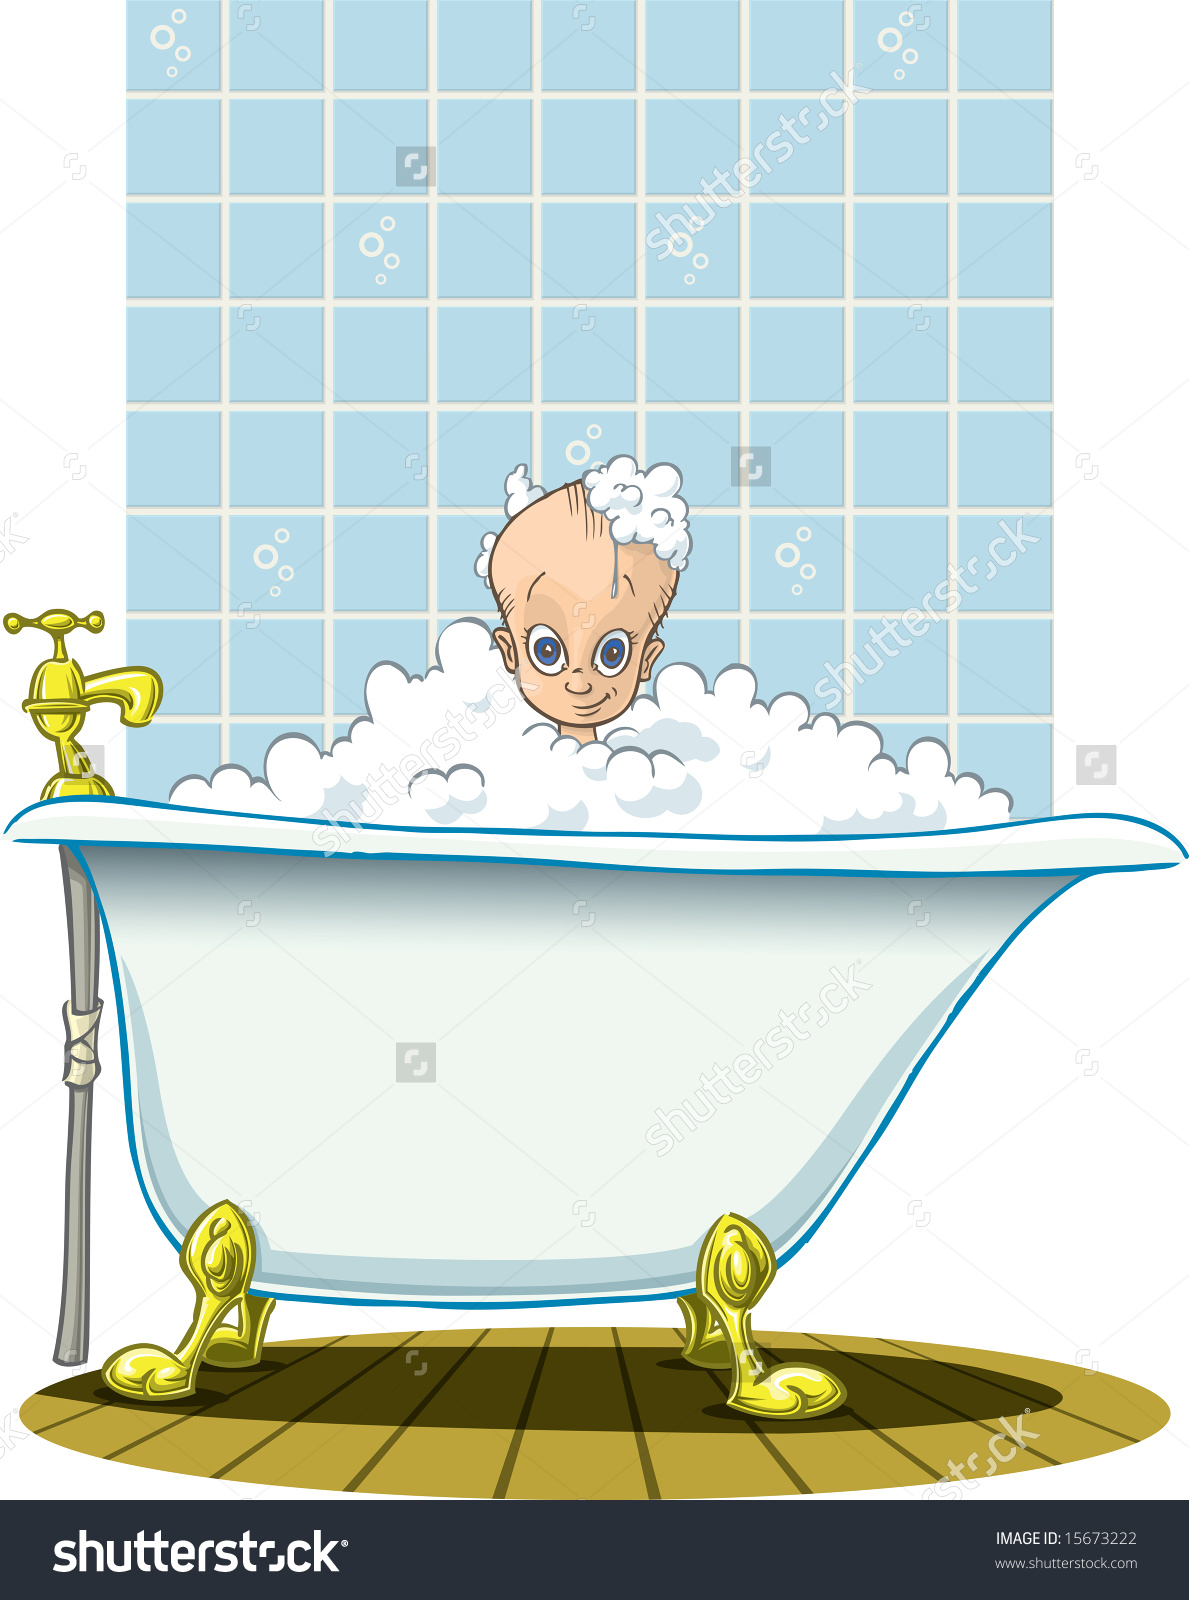 Bath Time For Baby Stock Photo 15673222 : Shutterstock